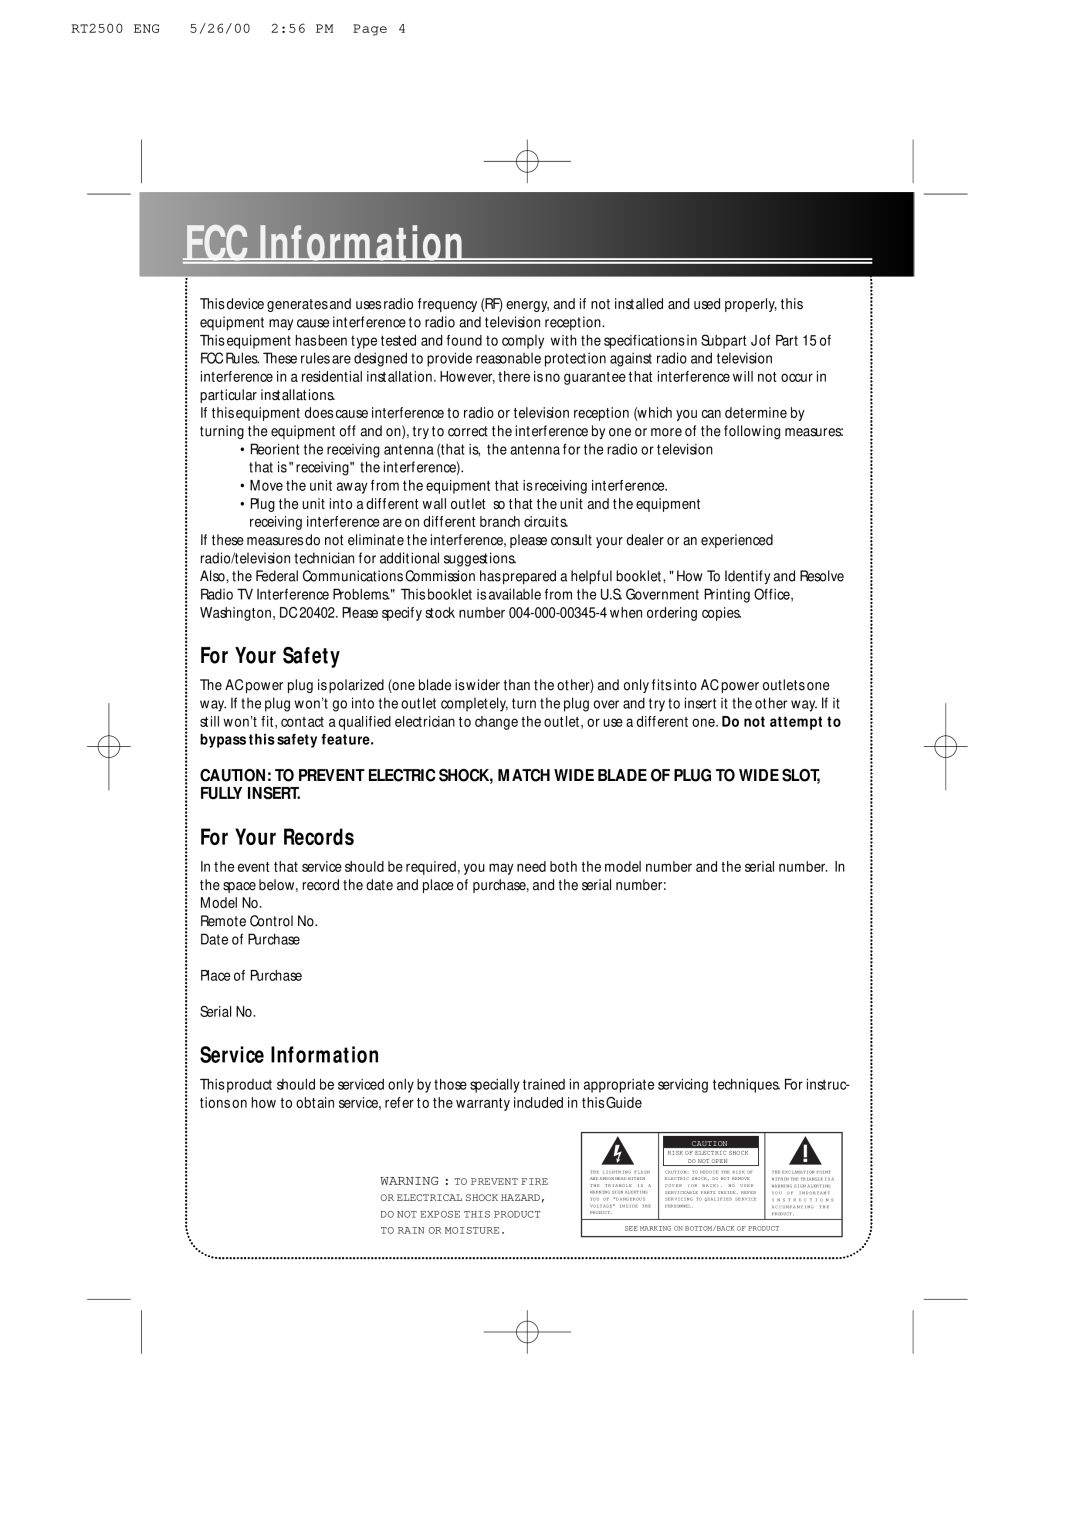 RCA RT2500R user manual FCCInformation, For Your Safety, For Your Records, Service Information, Fully Insert 